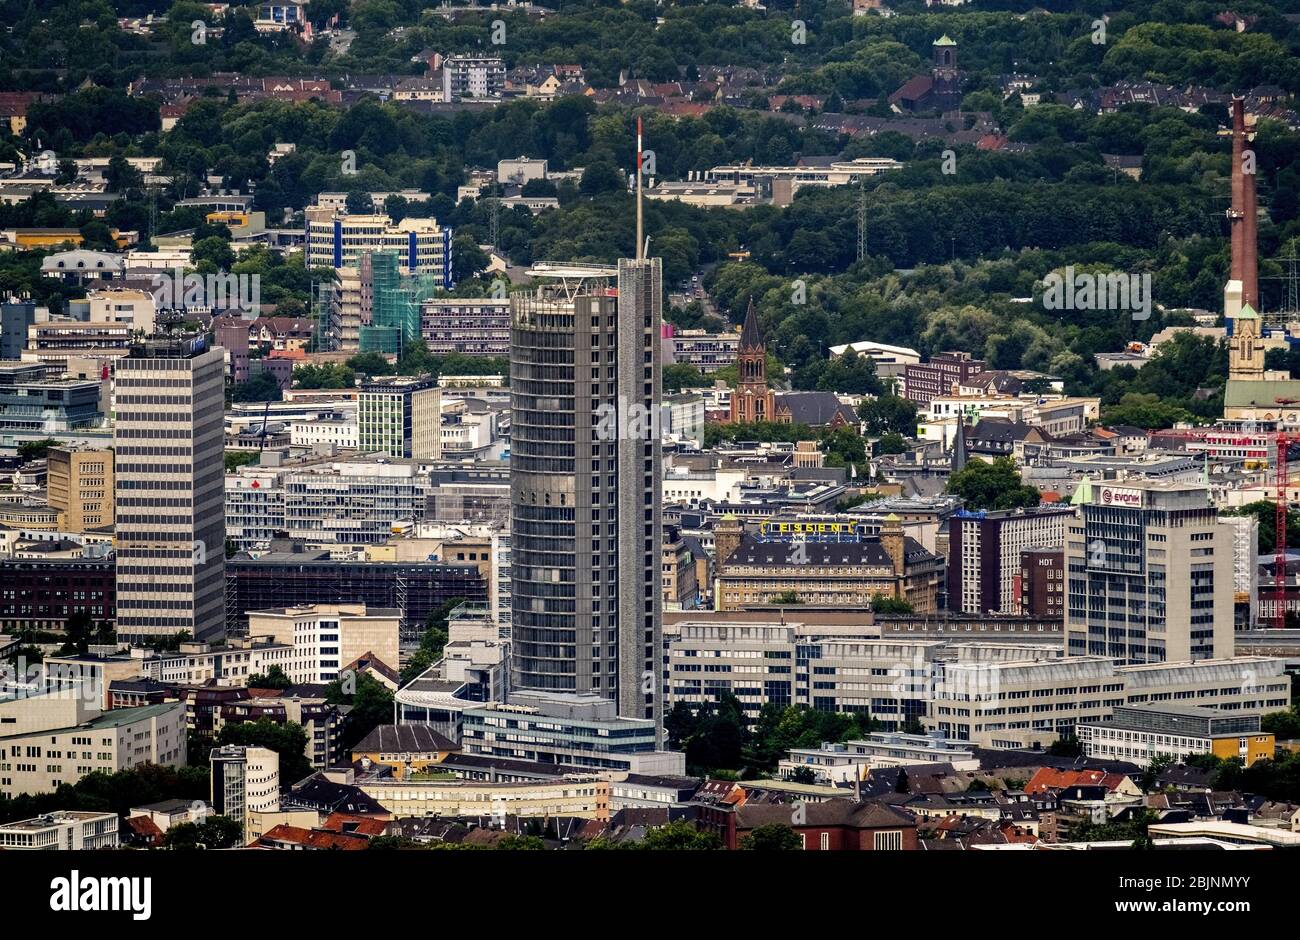 , city centre of Essen with RWE Tower, 31.07.2017, aerial view, Germany, North Rhine-Westphalia, Ruhr Area, Essen Stock Photo